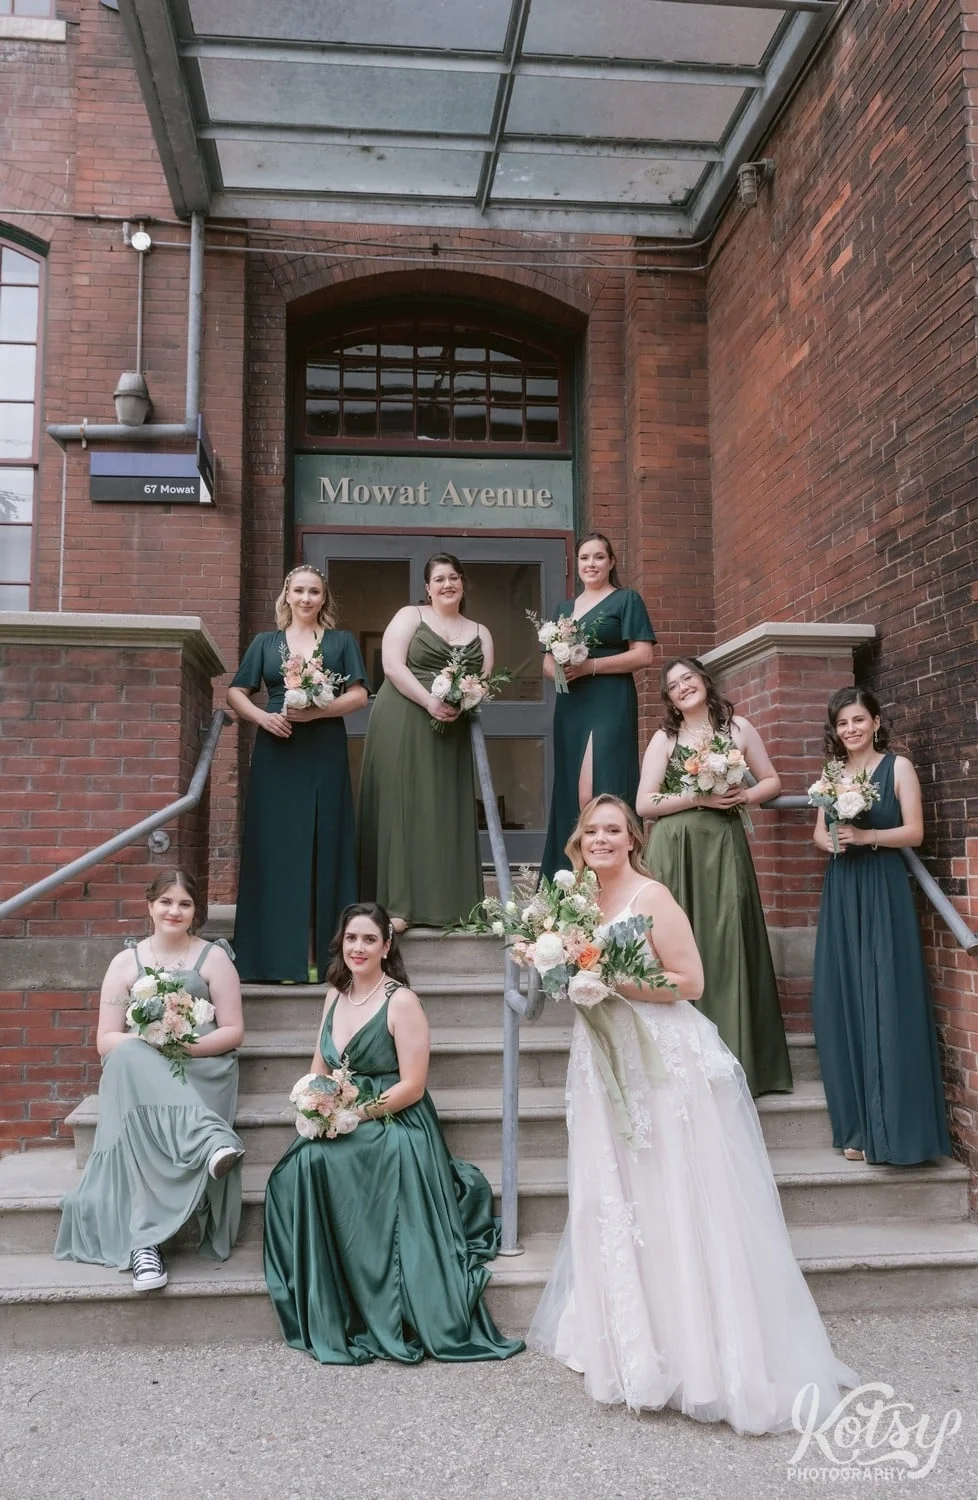 A bride wearing a white bridal gown and holding a bouquet of flowers poses with her bridesmaids wearing green dresses in front of a warehouse building at the carpet factory in Toronto Canada